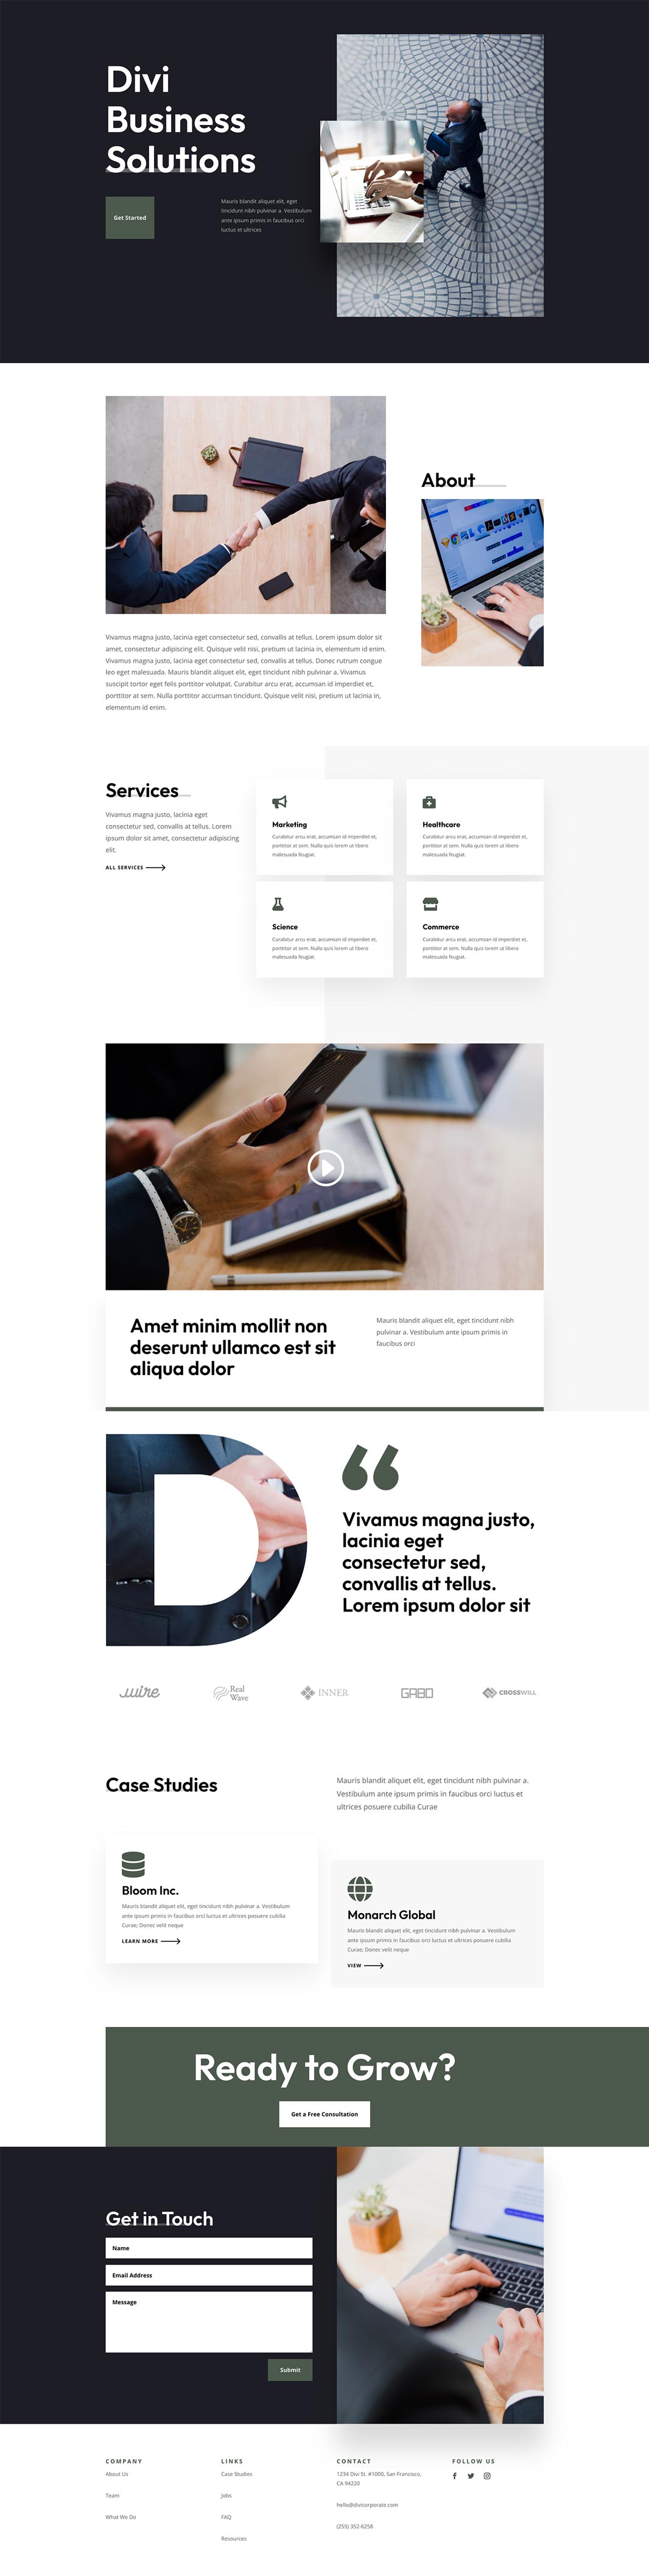 corporate-landing-page-divi-layout-by-elegant-themes